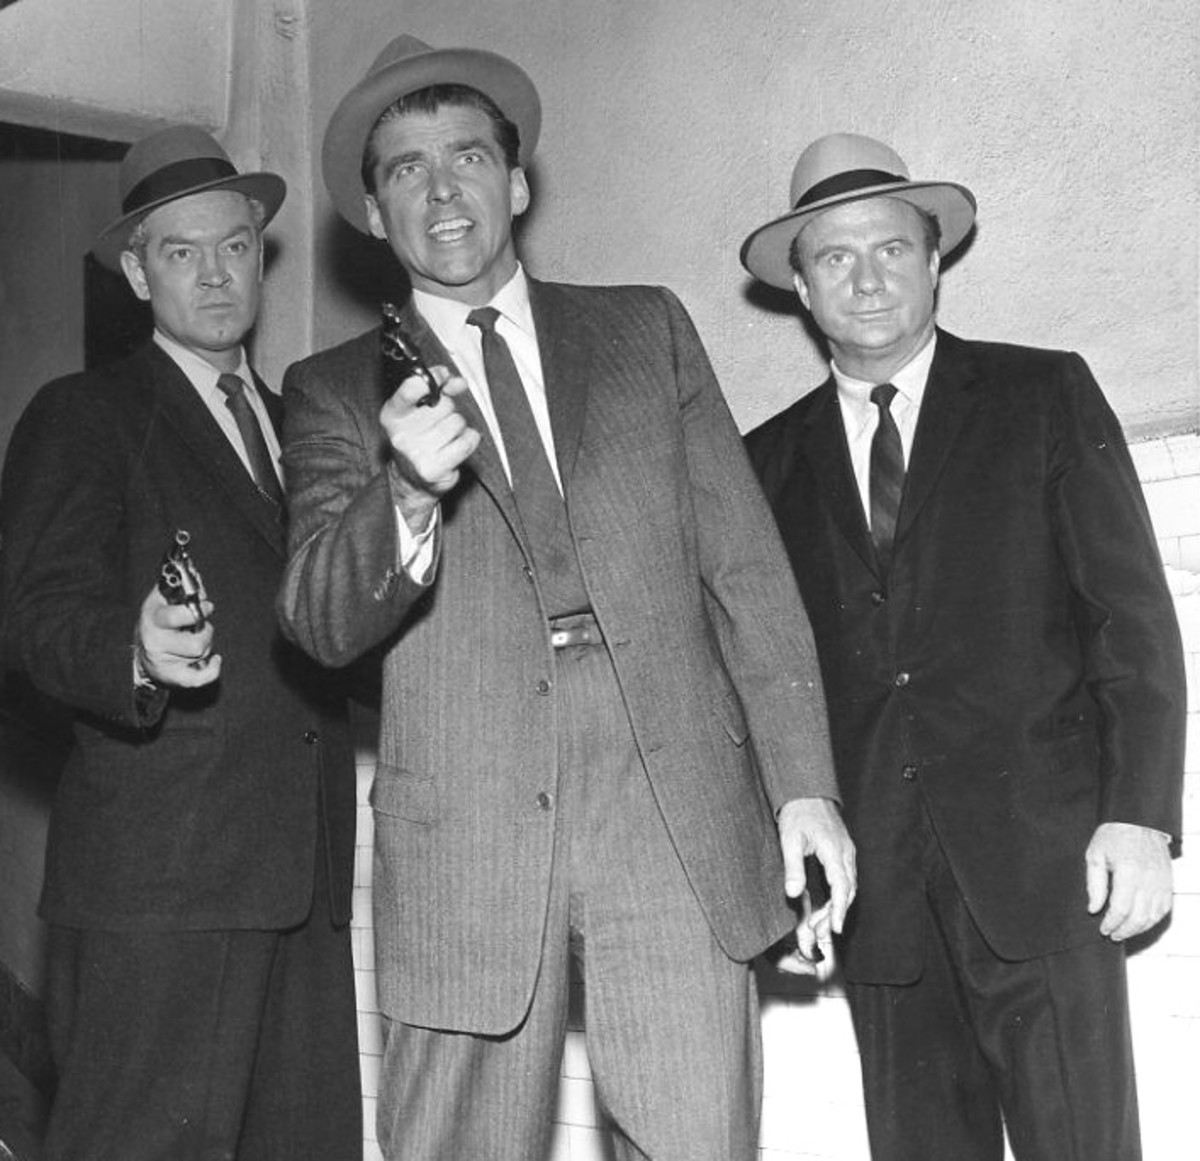 L–R: Arch Johnson, Bill Smith, and Jack Warden in the TV adaption of "The Asphalt Jungle" (1961).